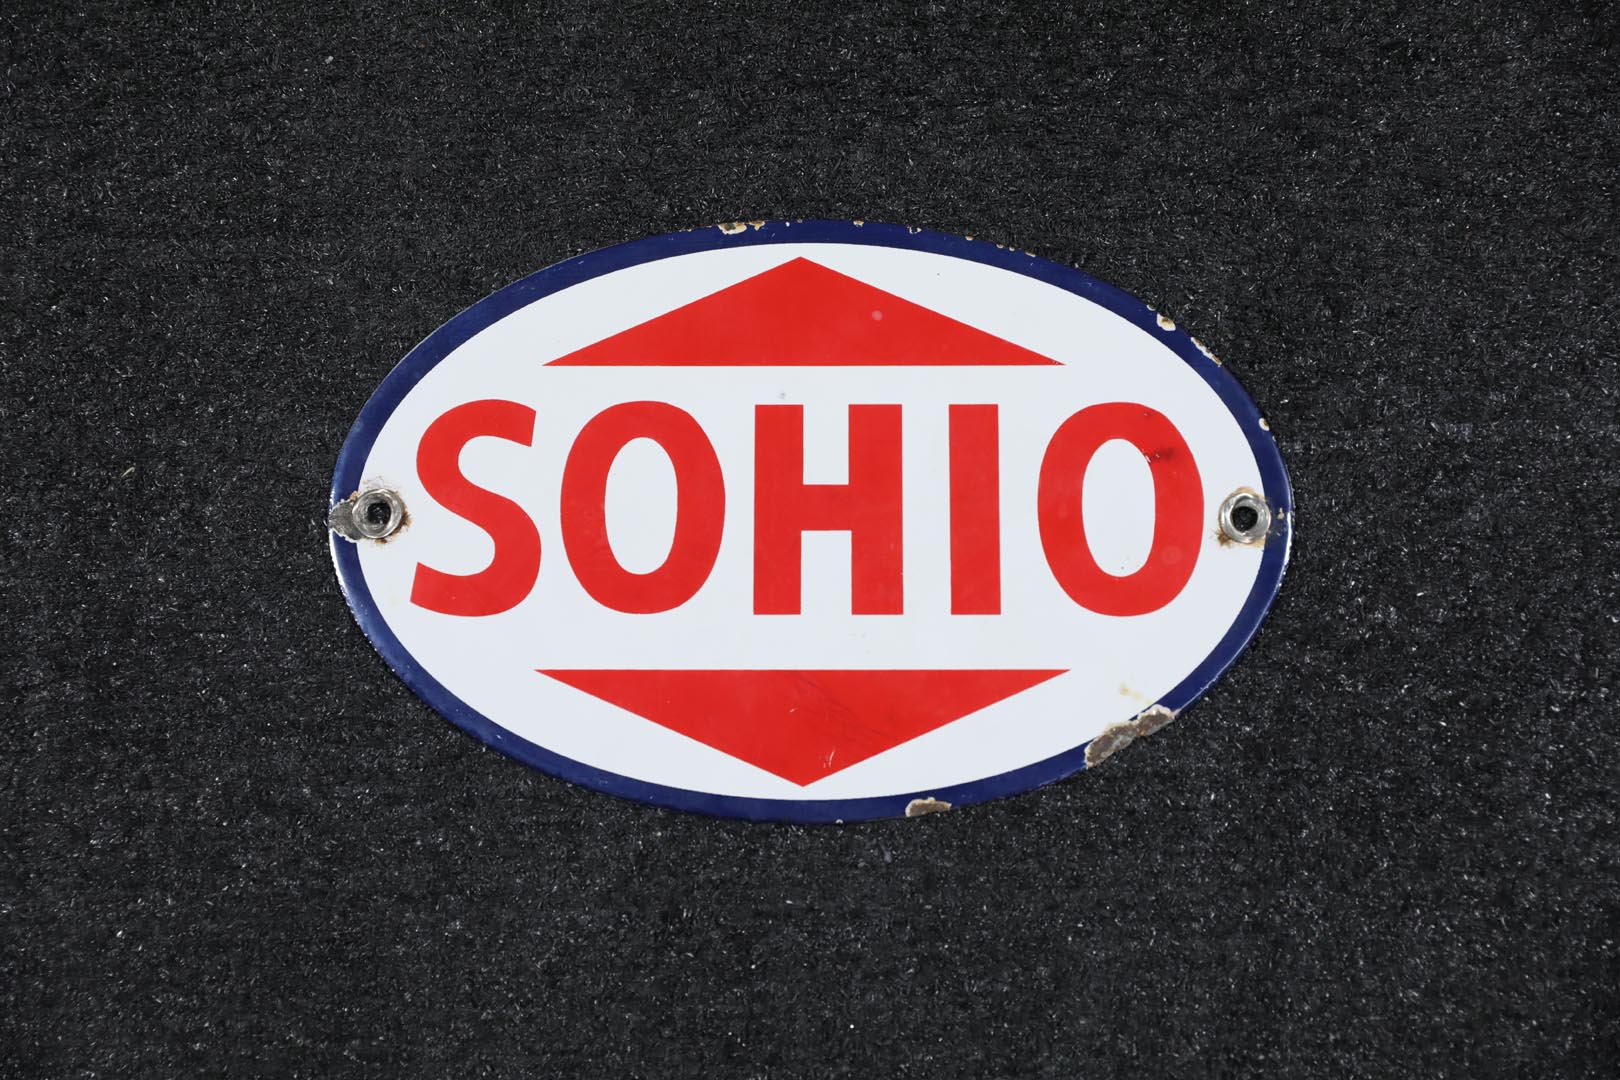  Sohio Gas Single-Sided Porcela in Pump Plate - Small 